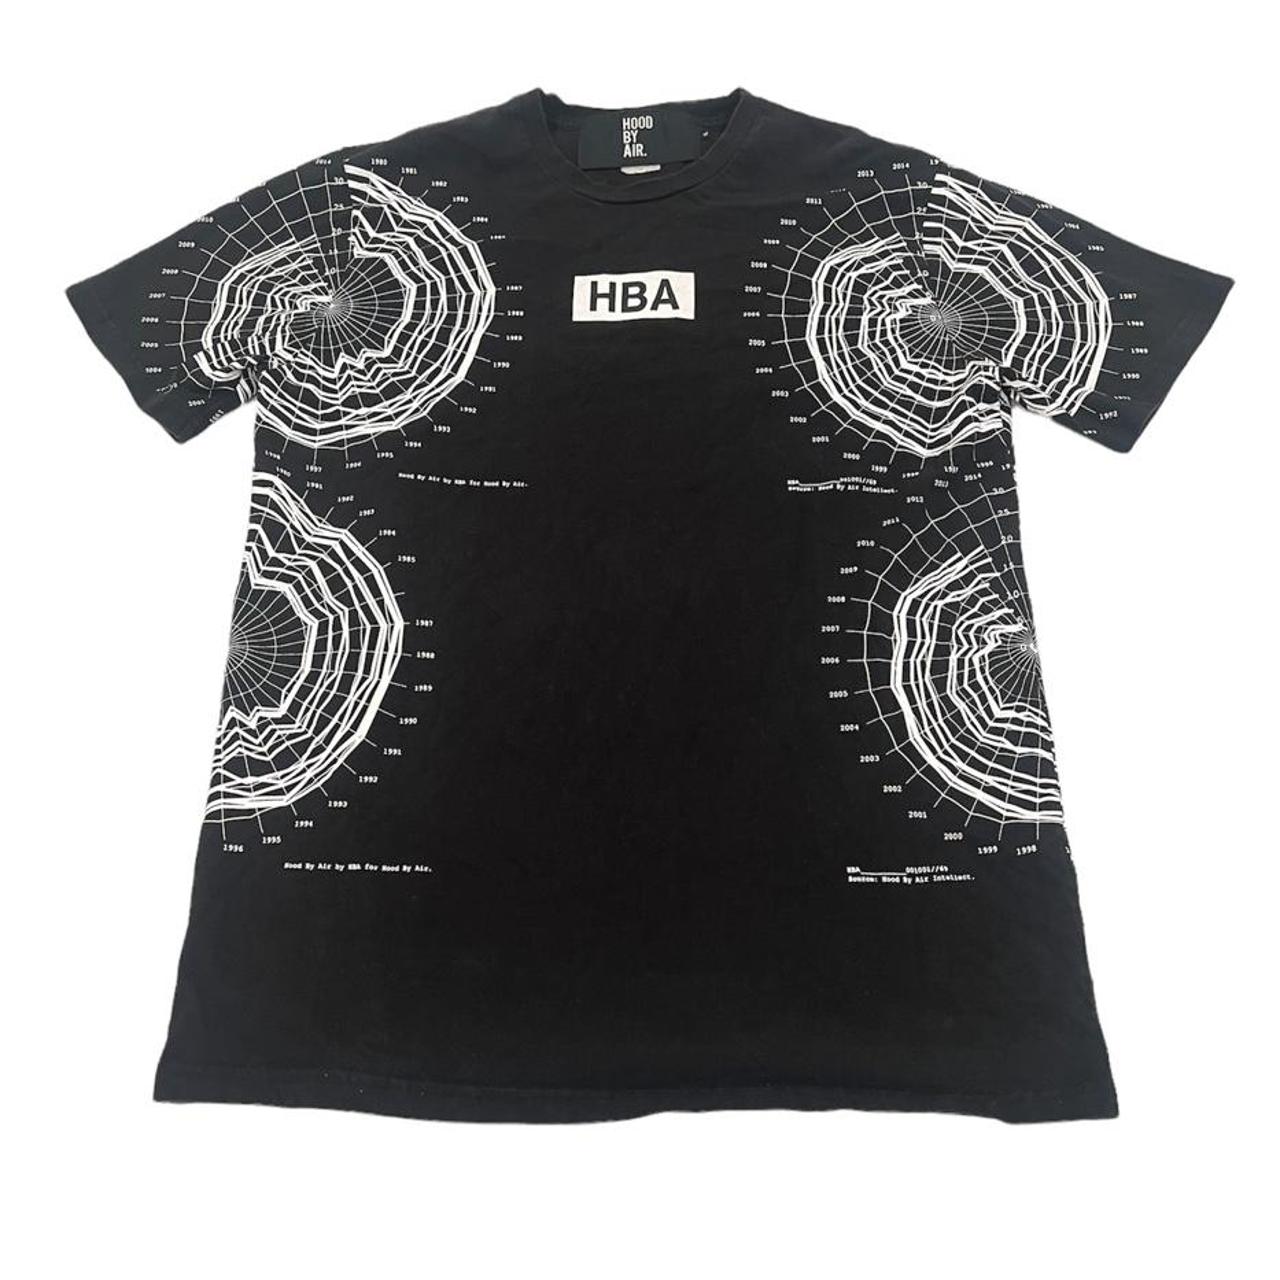 Hood By Air Men's Black and White T-shirt